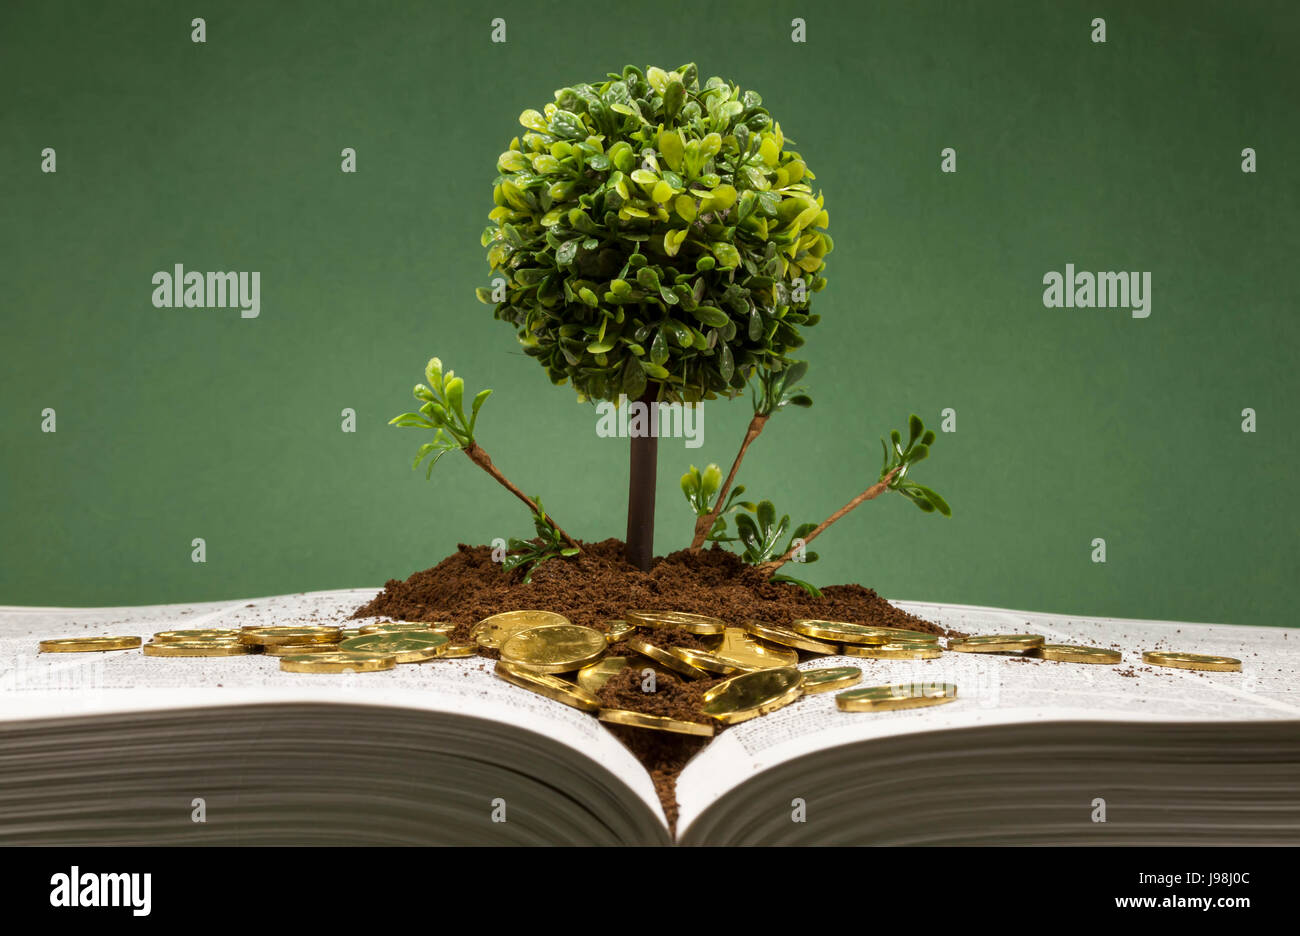 Miniature and decorative tree with round canopy on a layer of soil and scattered golden coins on an open book , concept about knowledge and finance Stock Photo